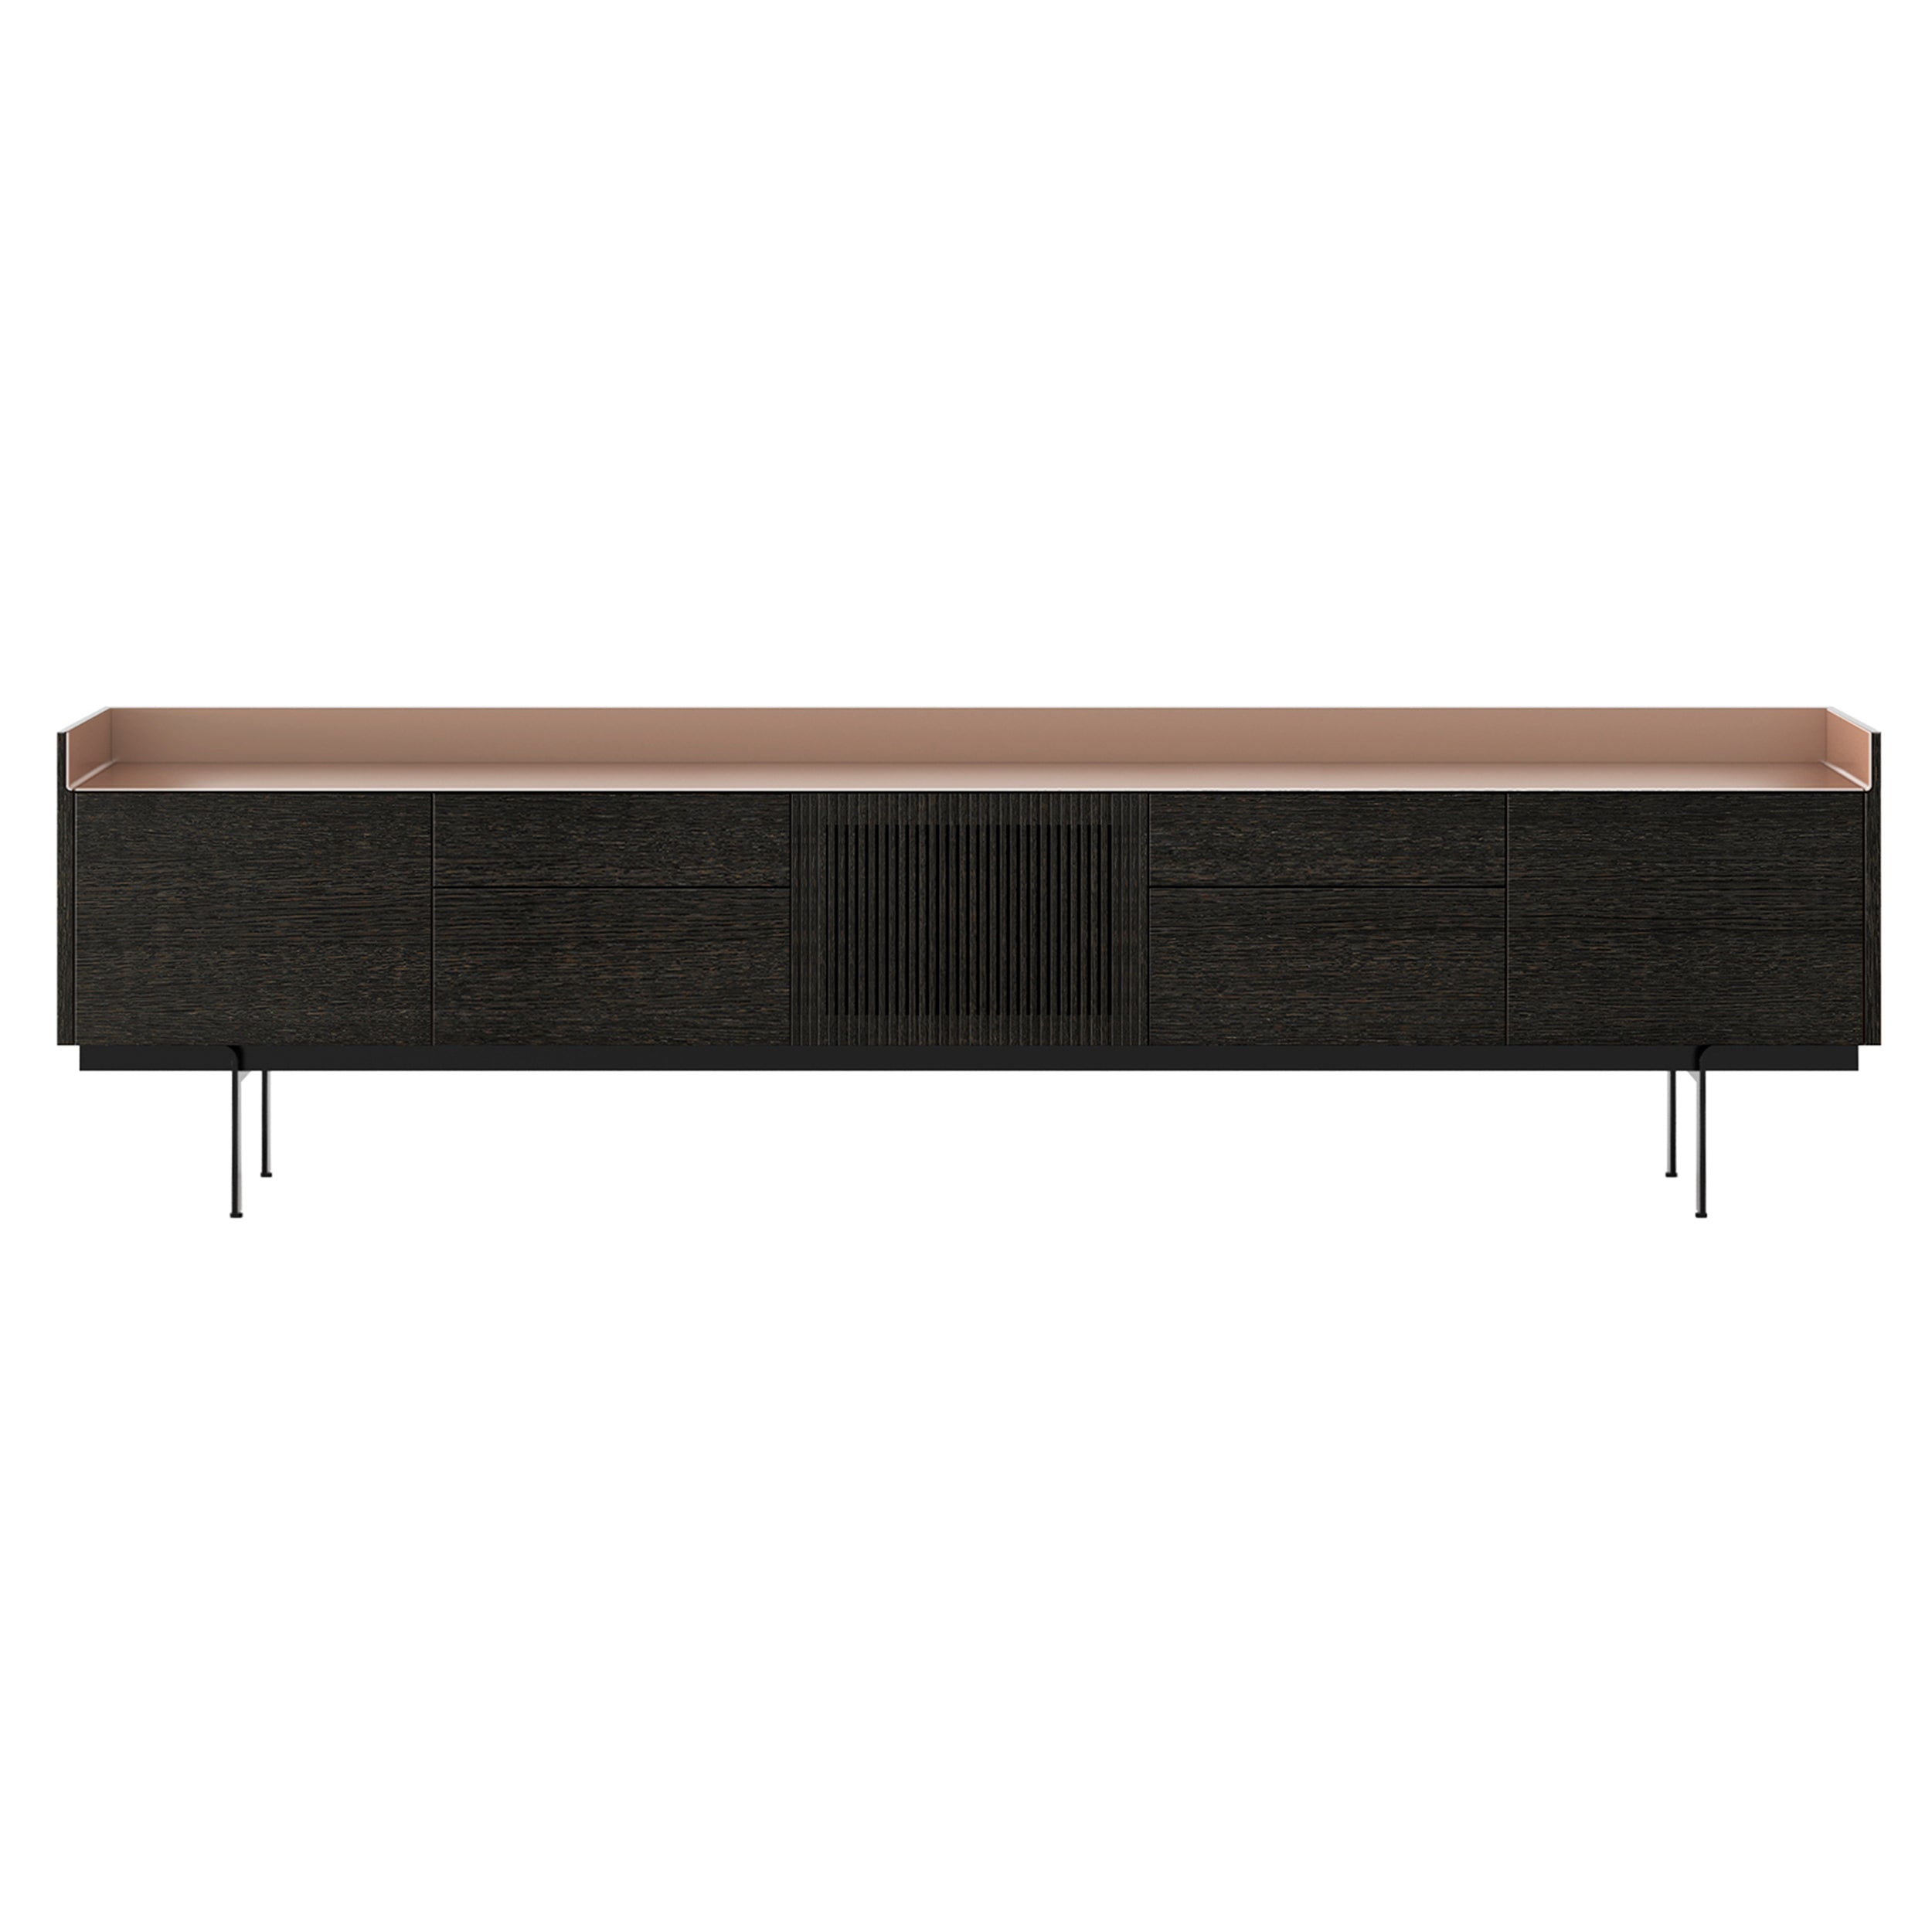 Stockholm Technic Sideboard: STH505 + Dark Grey Stained Oak + Anodized Aluminum Pale Rose + Black